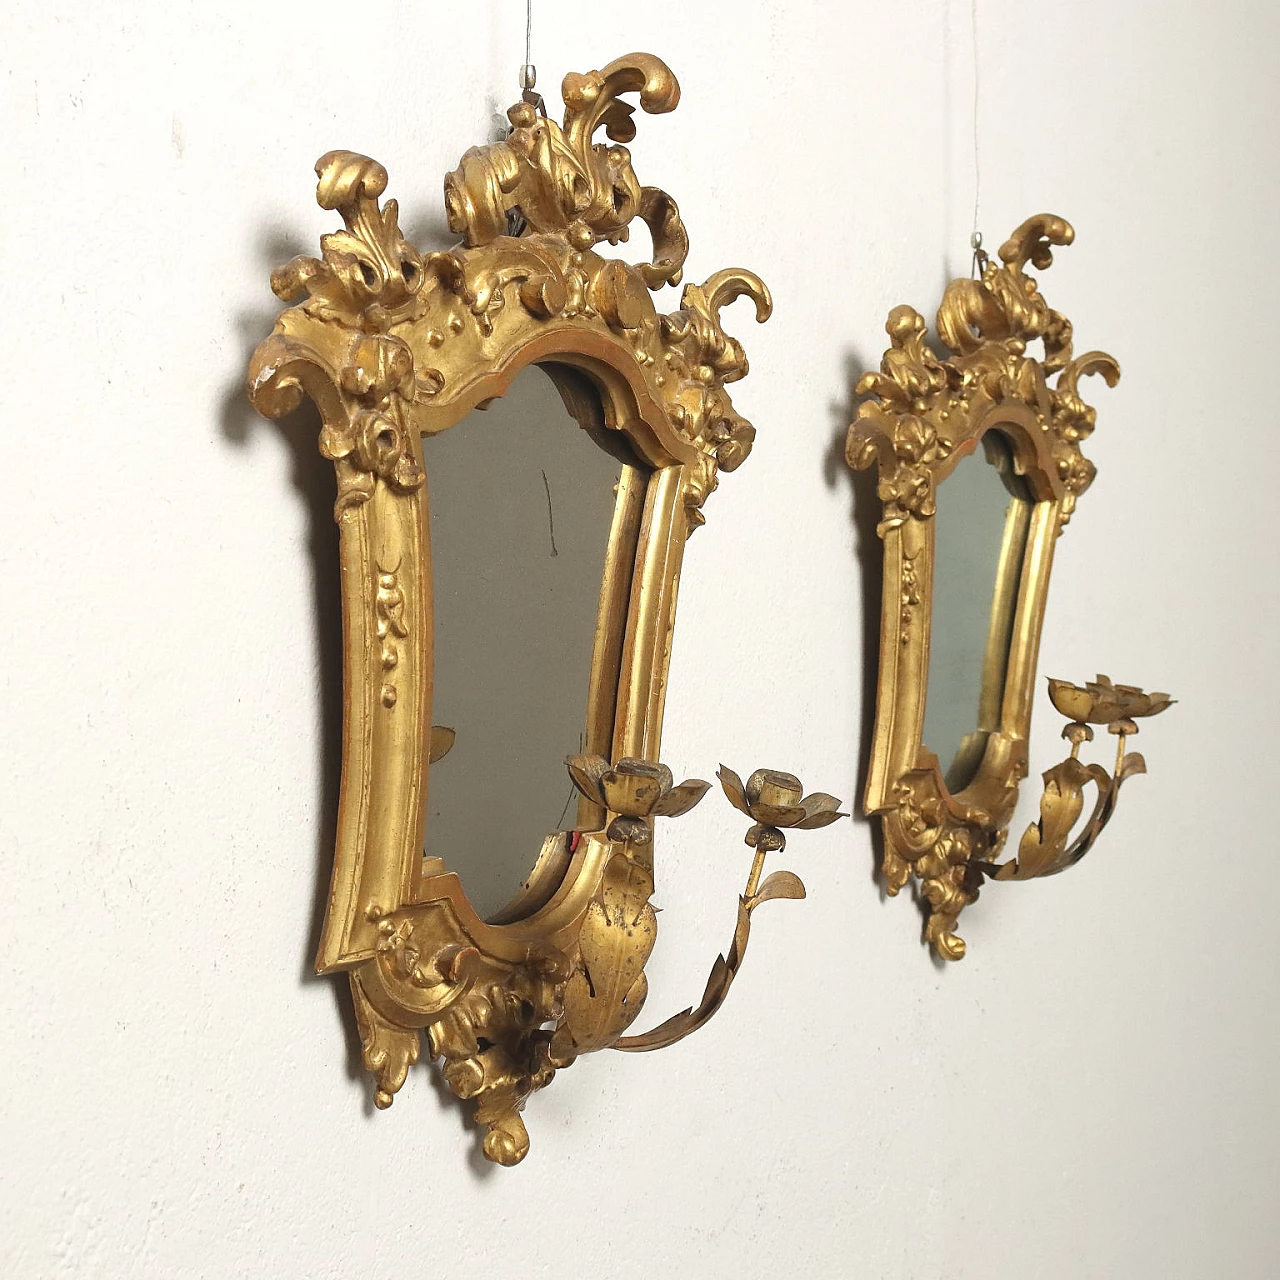 Pair of Baroque embossed sheet metal mirrors with lamp-holding arms, early 18th century 3